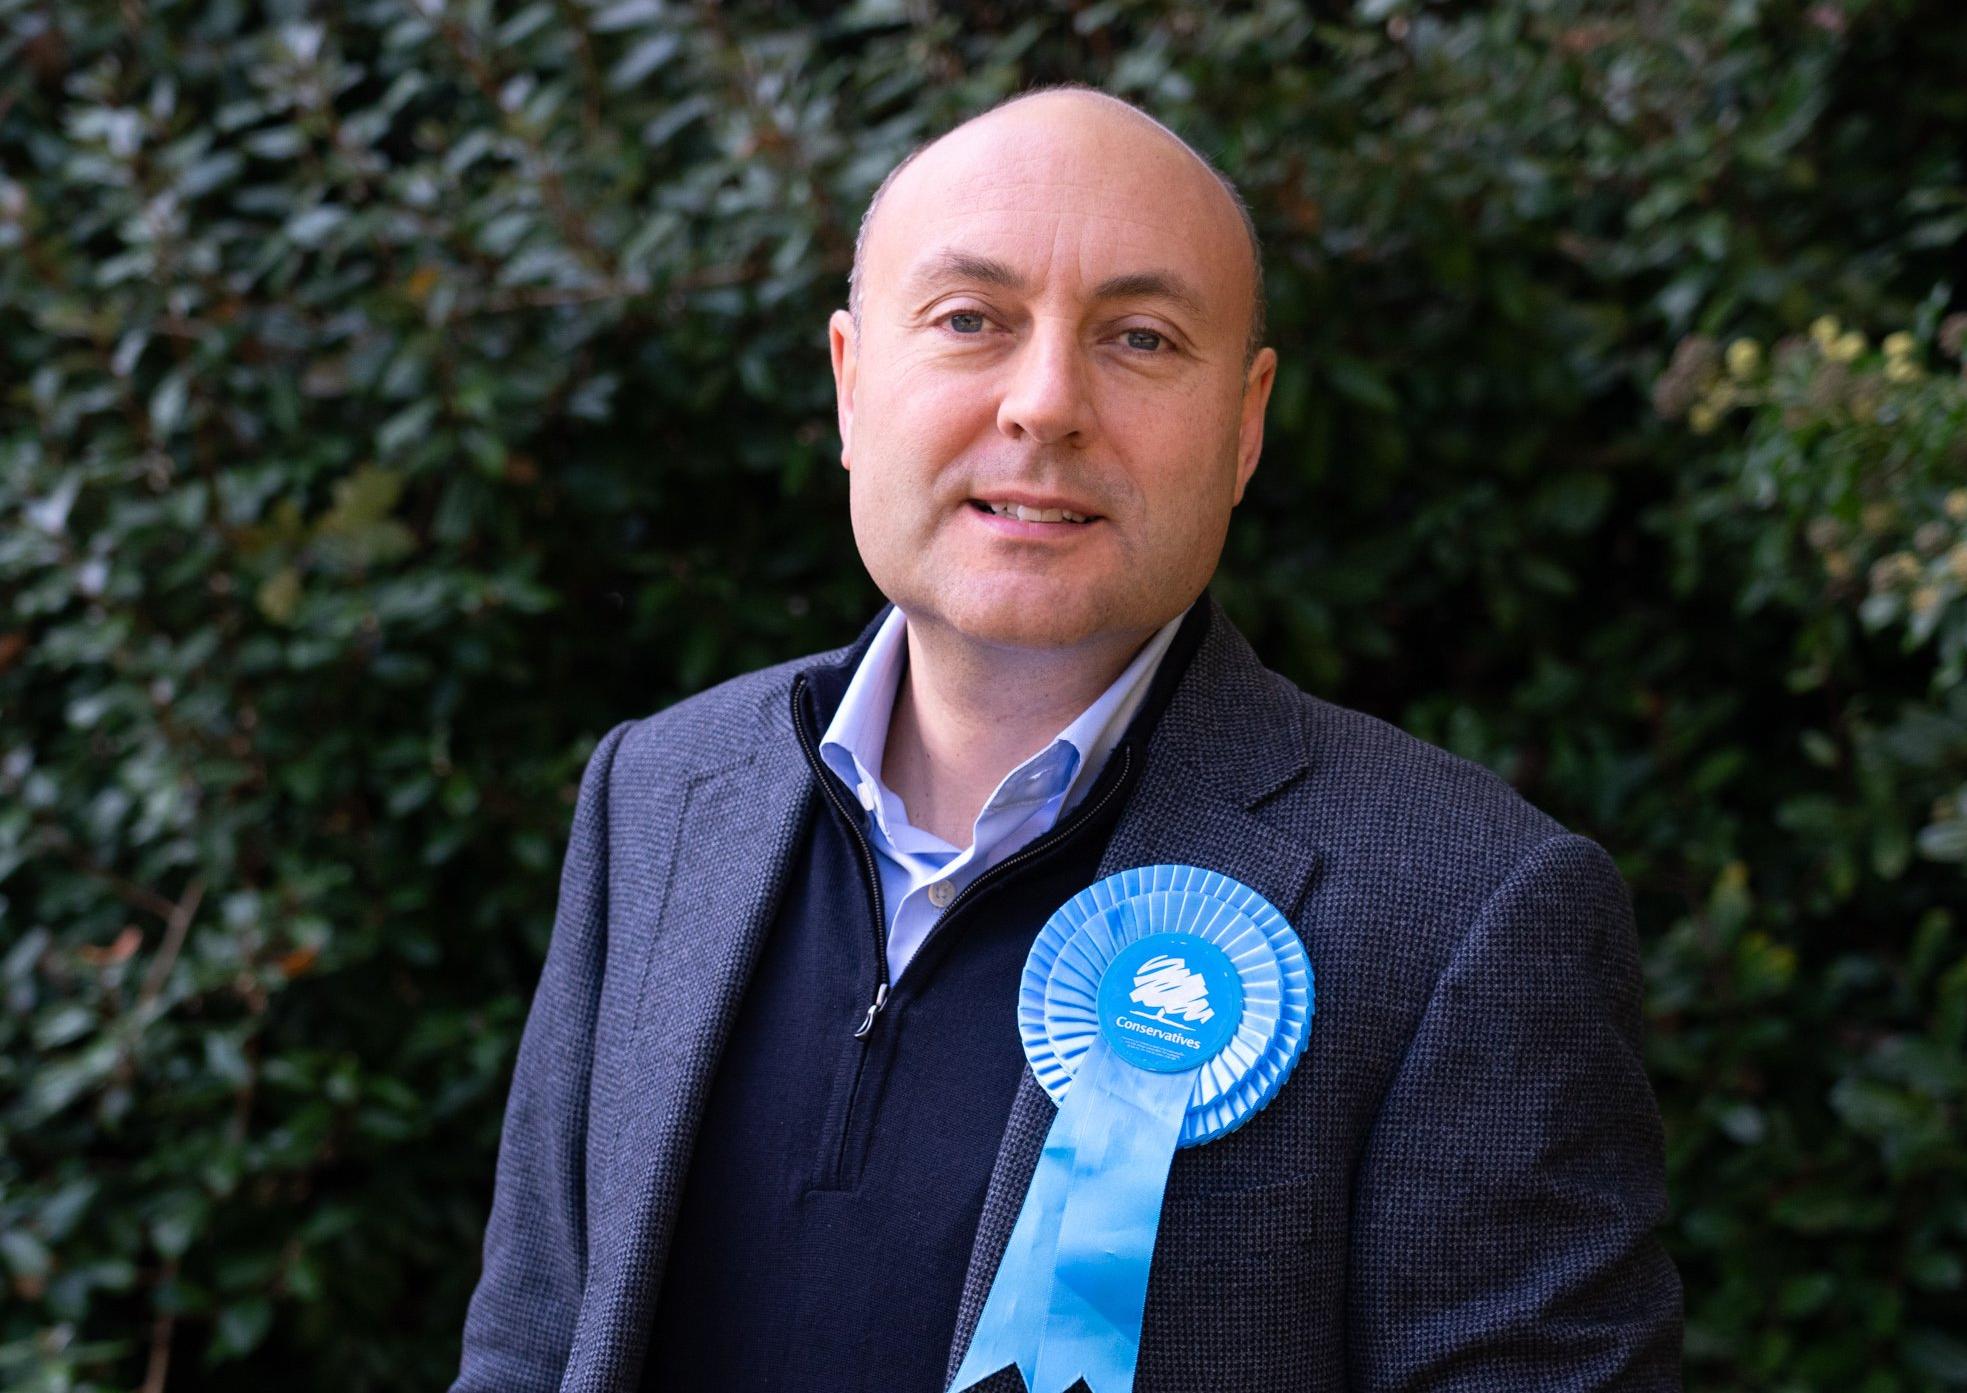 Conservative Andrew Griffith has been elected Arundel and South Downs MP for the first time